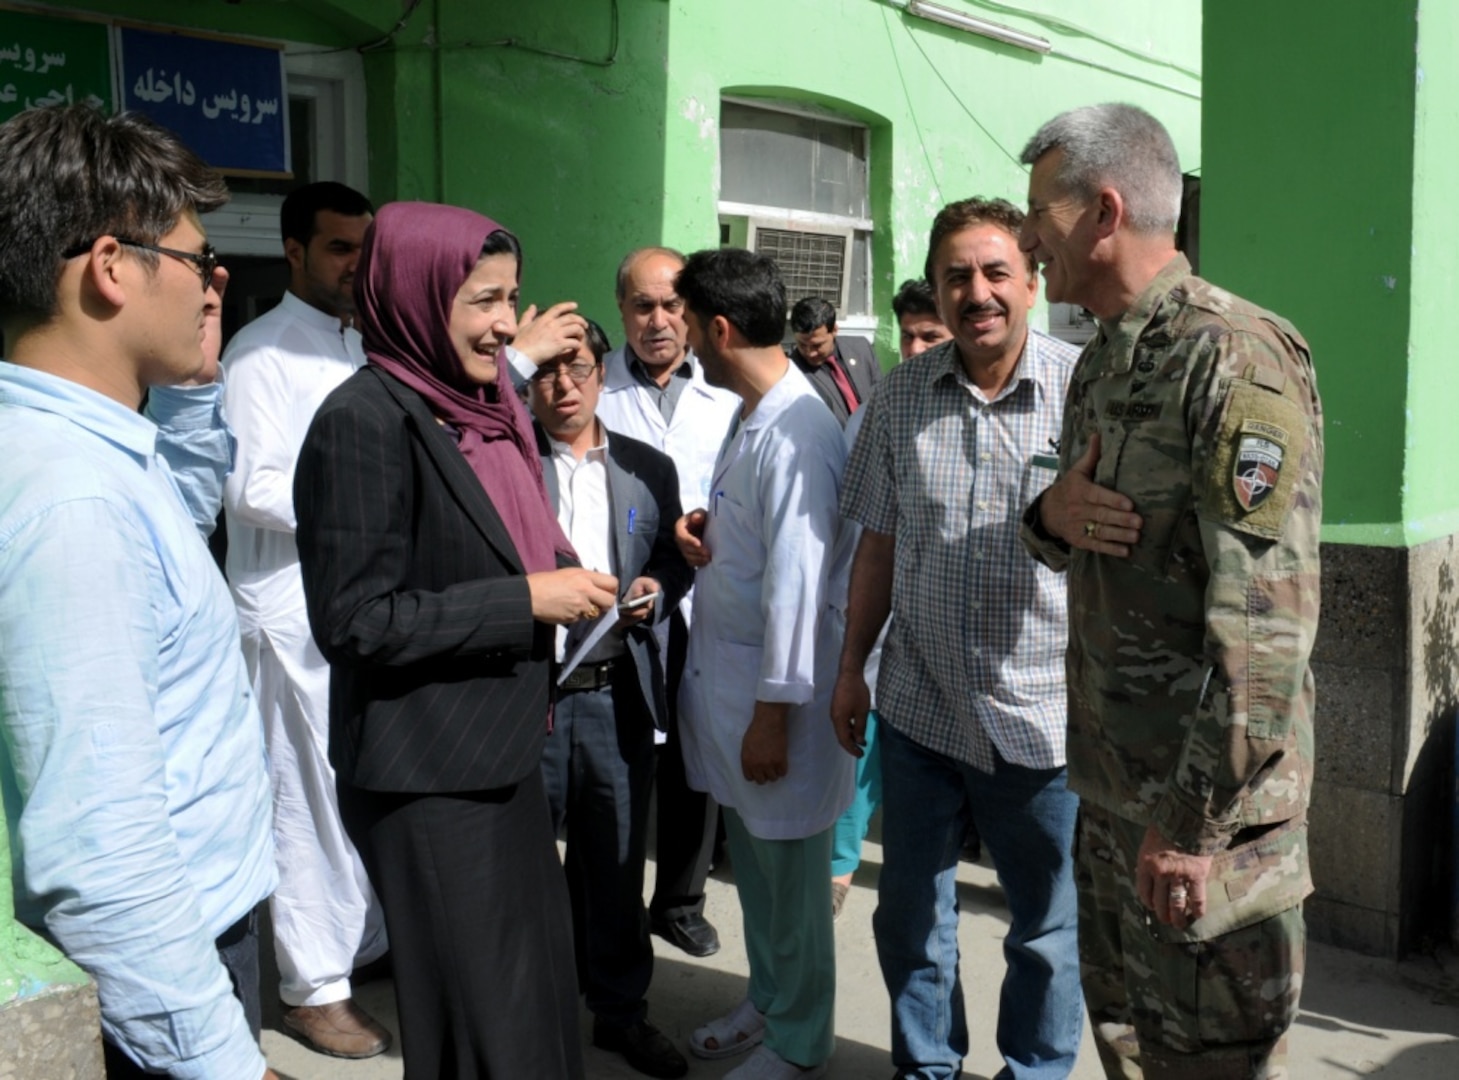 Army Gen. John W. Nicholson, Resolute Support commander, speaks to nurses, medical staff and hospital managers at the Kabul Women’s Hospital in Afghanistan, May 18, 2017. Nicholson emphasized the importance of women in peace building and in strengthening the future of Afghanistan. Nicholson toured the hospital to oversee improvements that began last December. He was accompanied by Afghan Defense Minister Mohammed Masoom Stanekzai, Sidqa Abudllah Adeeb-Rabia Balkhi, hospital director and Ambassador Hugo Llorens, the special chargé d’affaires of the U.S. Embassy in Kabul. Air Force photo by Tech. Sgt. Robert M. Trujillo